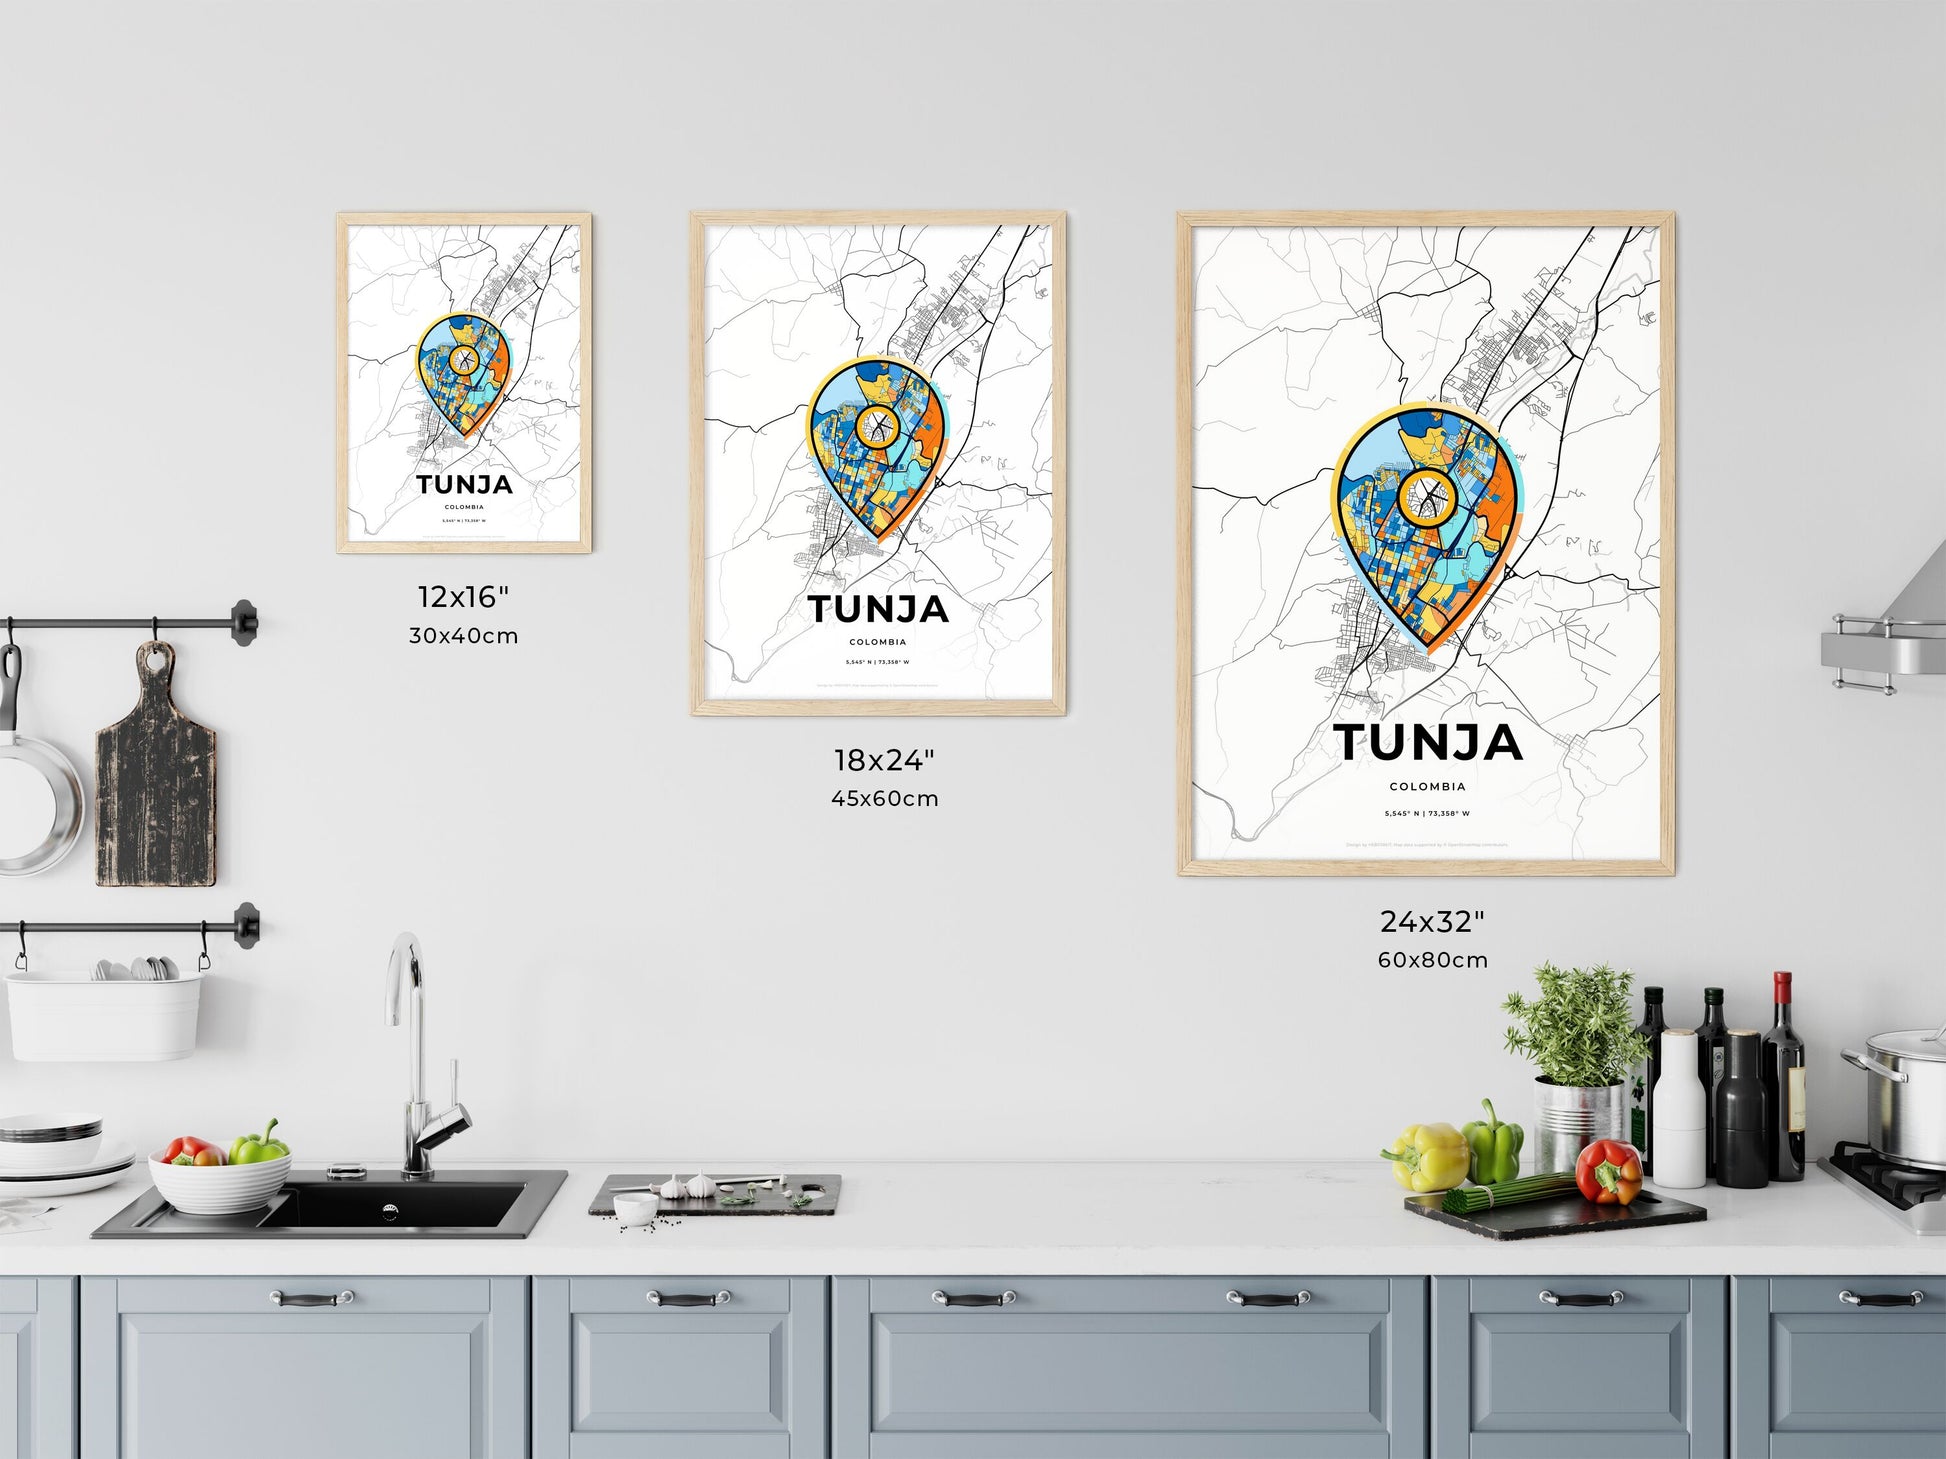 TUNJA COLOMBIA minimal art map with a colorful icon.